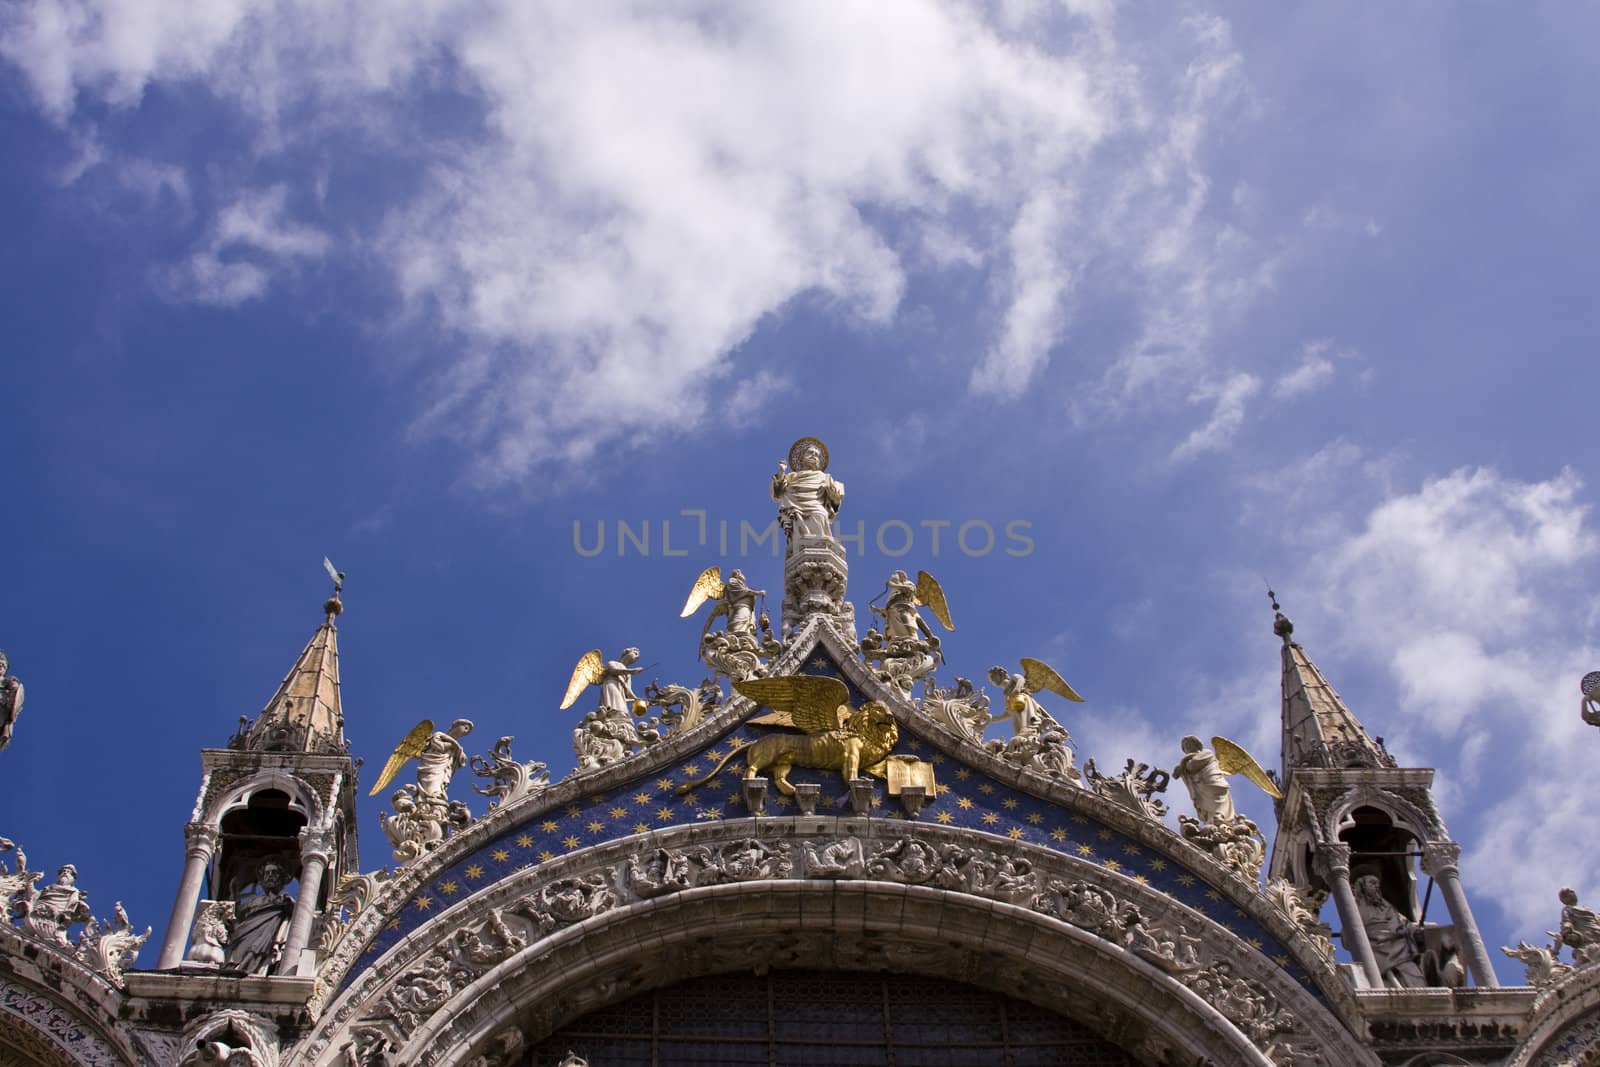 The ornate statues and carvings above the entrance to St Mark`s basilica in Venice Italy